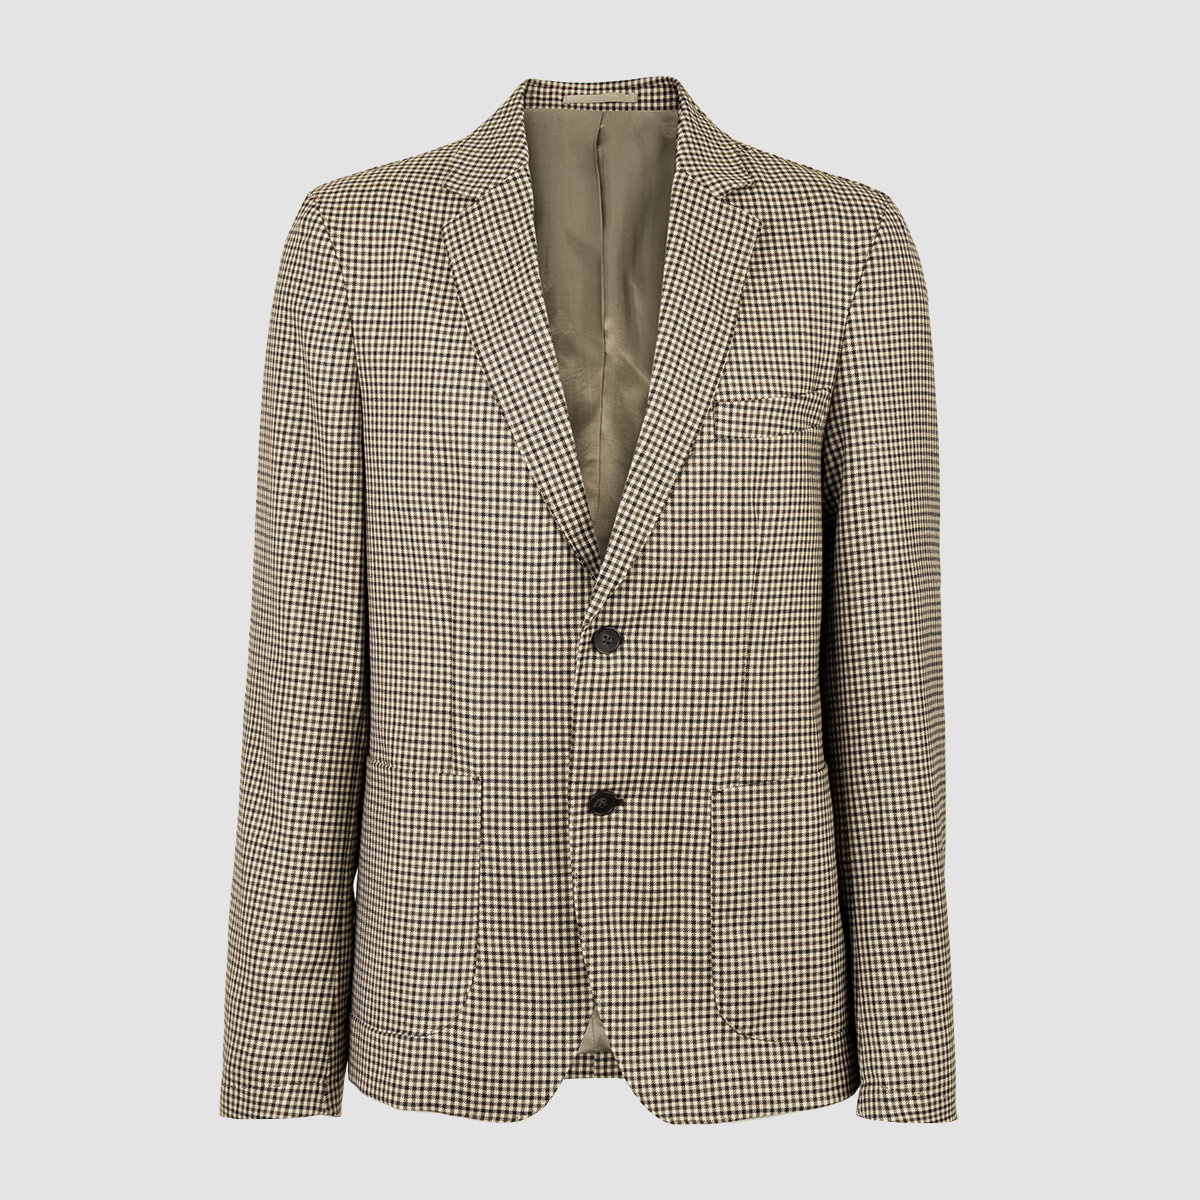 Lightweight Jacket English Cotton Wool Check - Navy Blue Olive